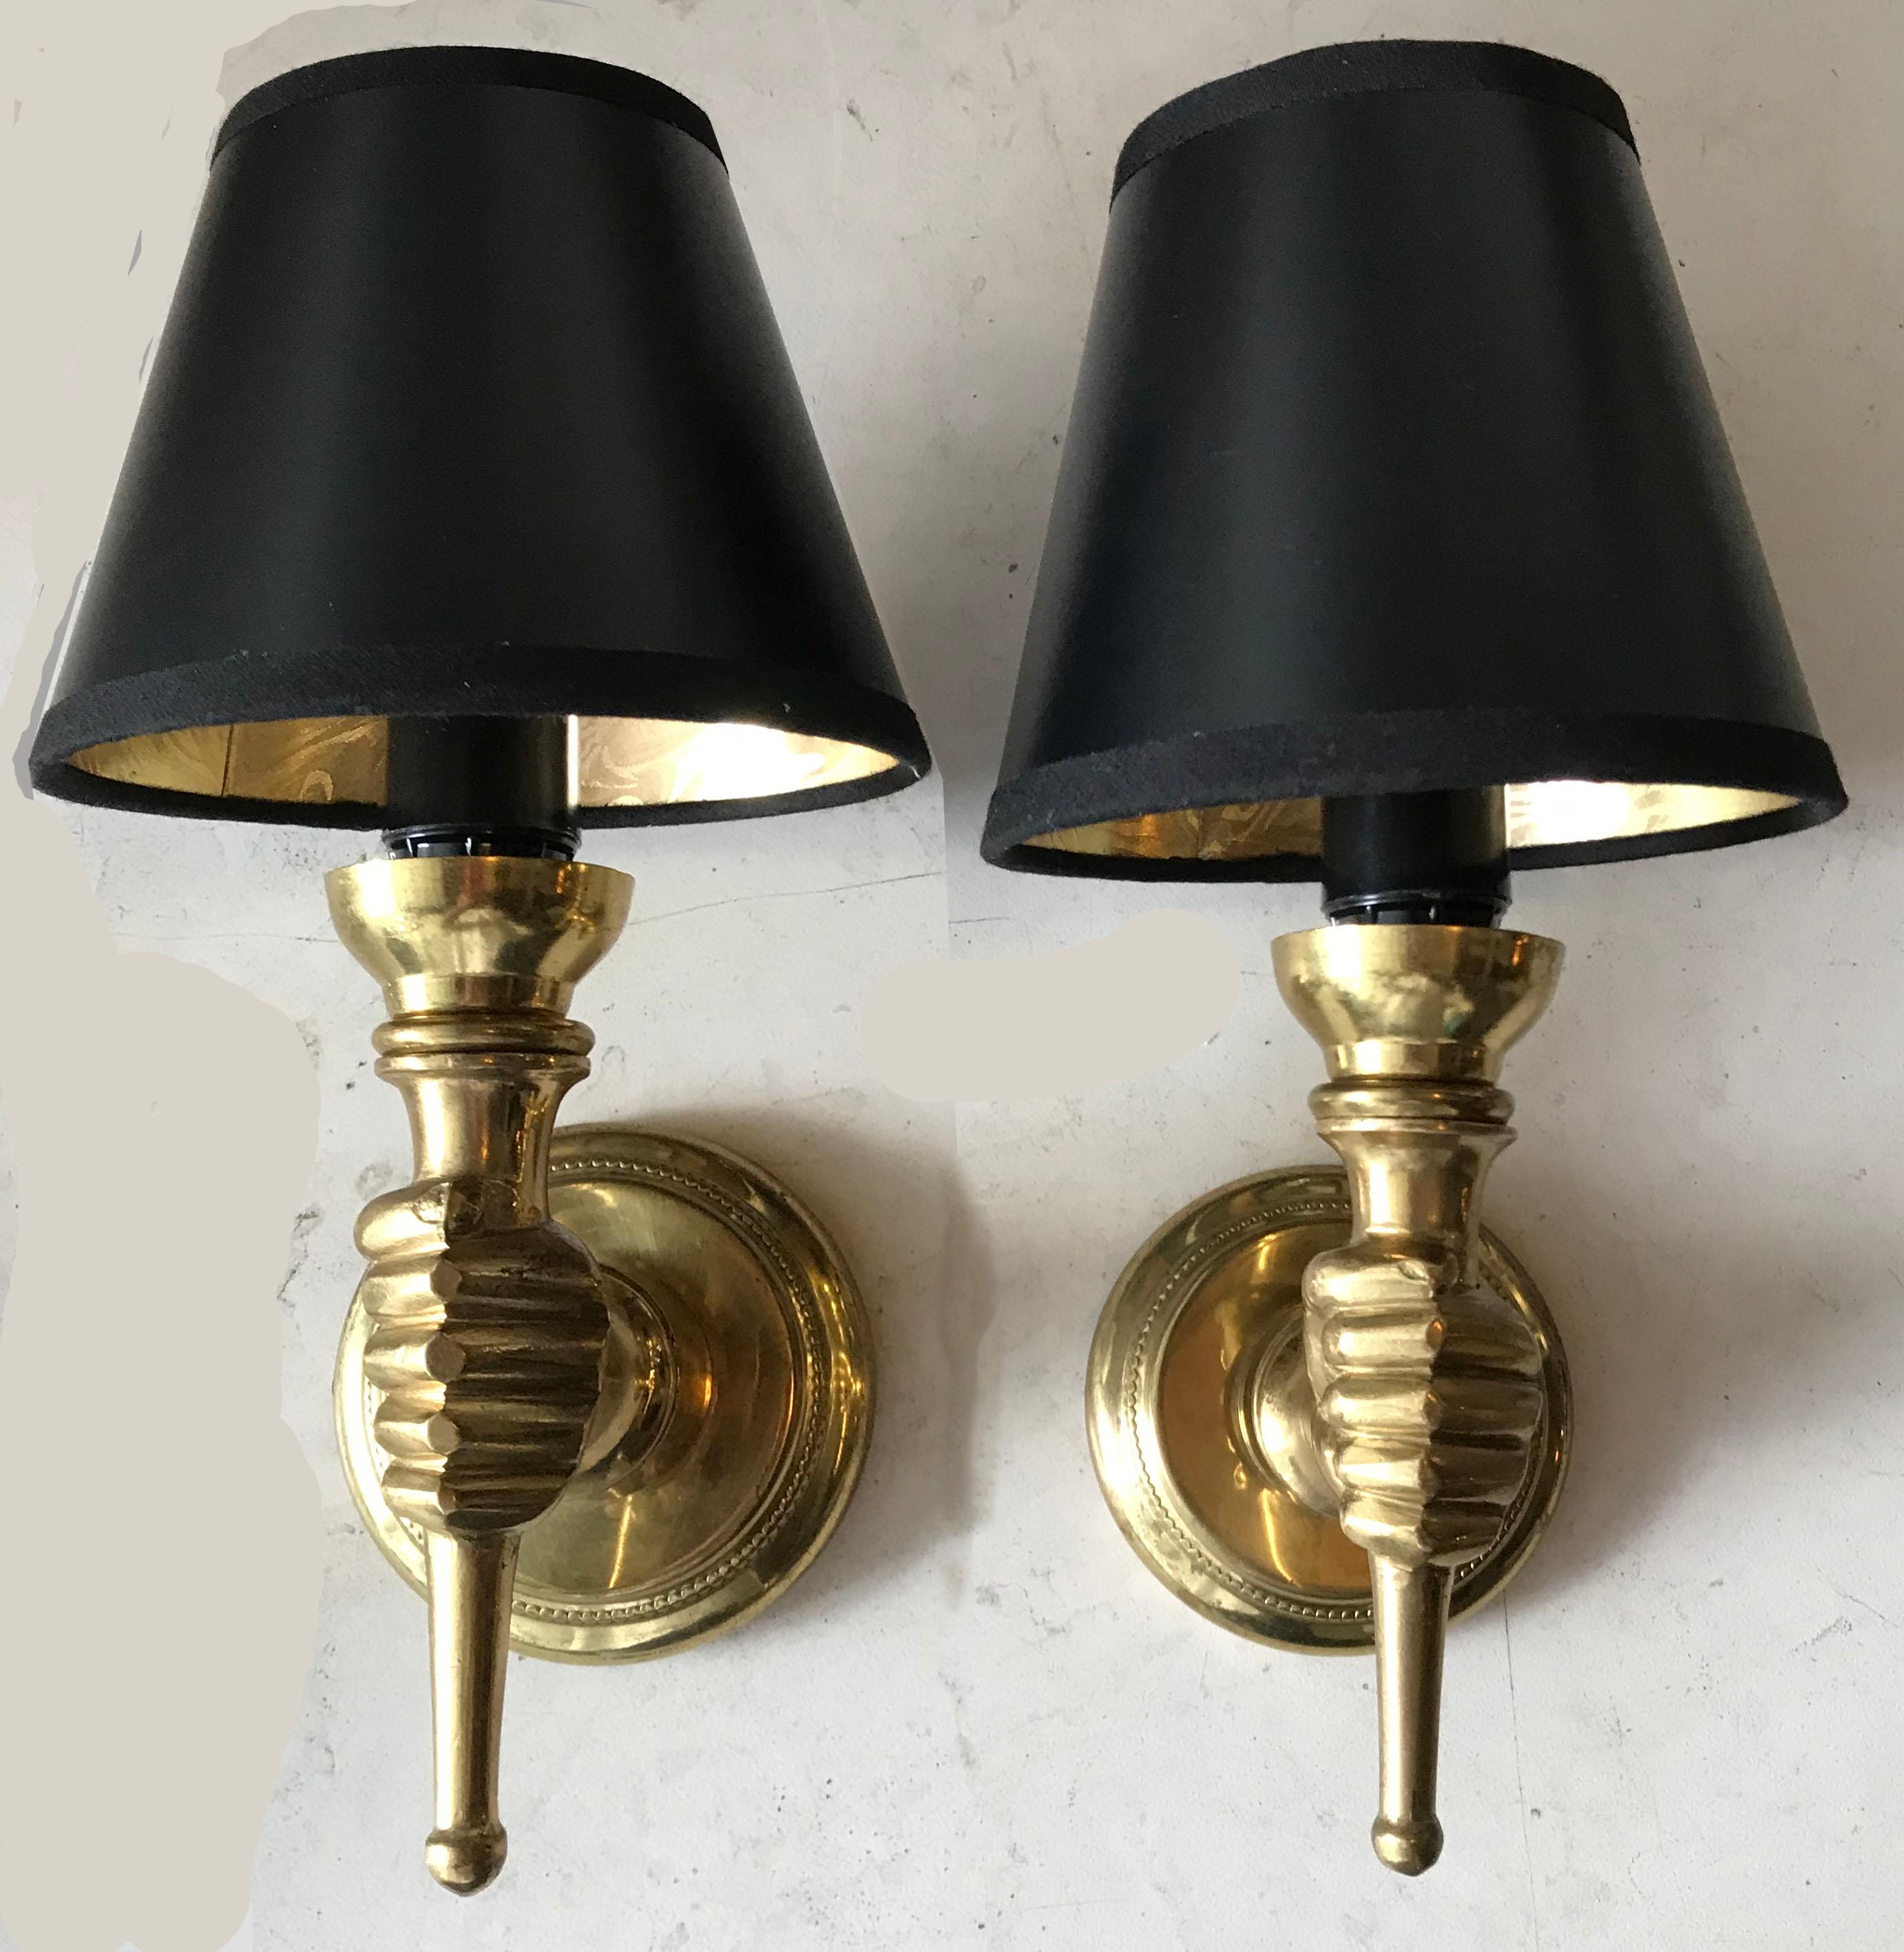 Pair of French sconces figuring hands holding a torche†André Arbus style. Coming from an hotel in Paris 2 pairs available, priced by pair. US rewired and in working condition. One light per sconce, 60 watts max. Backplate diameter 3 inches.
US